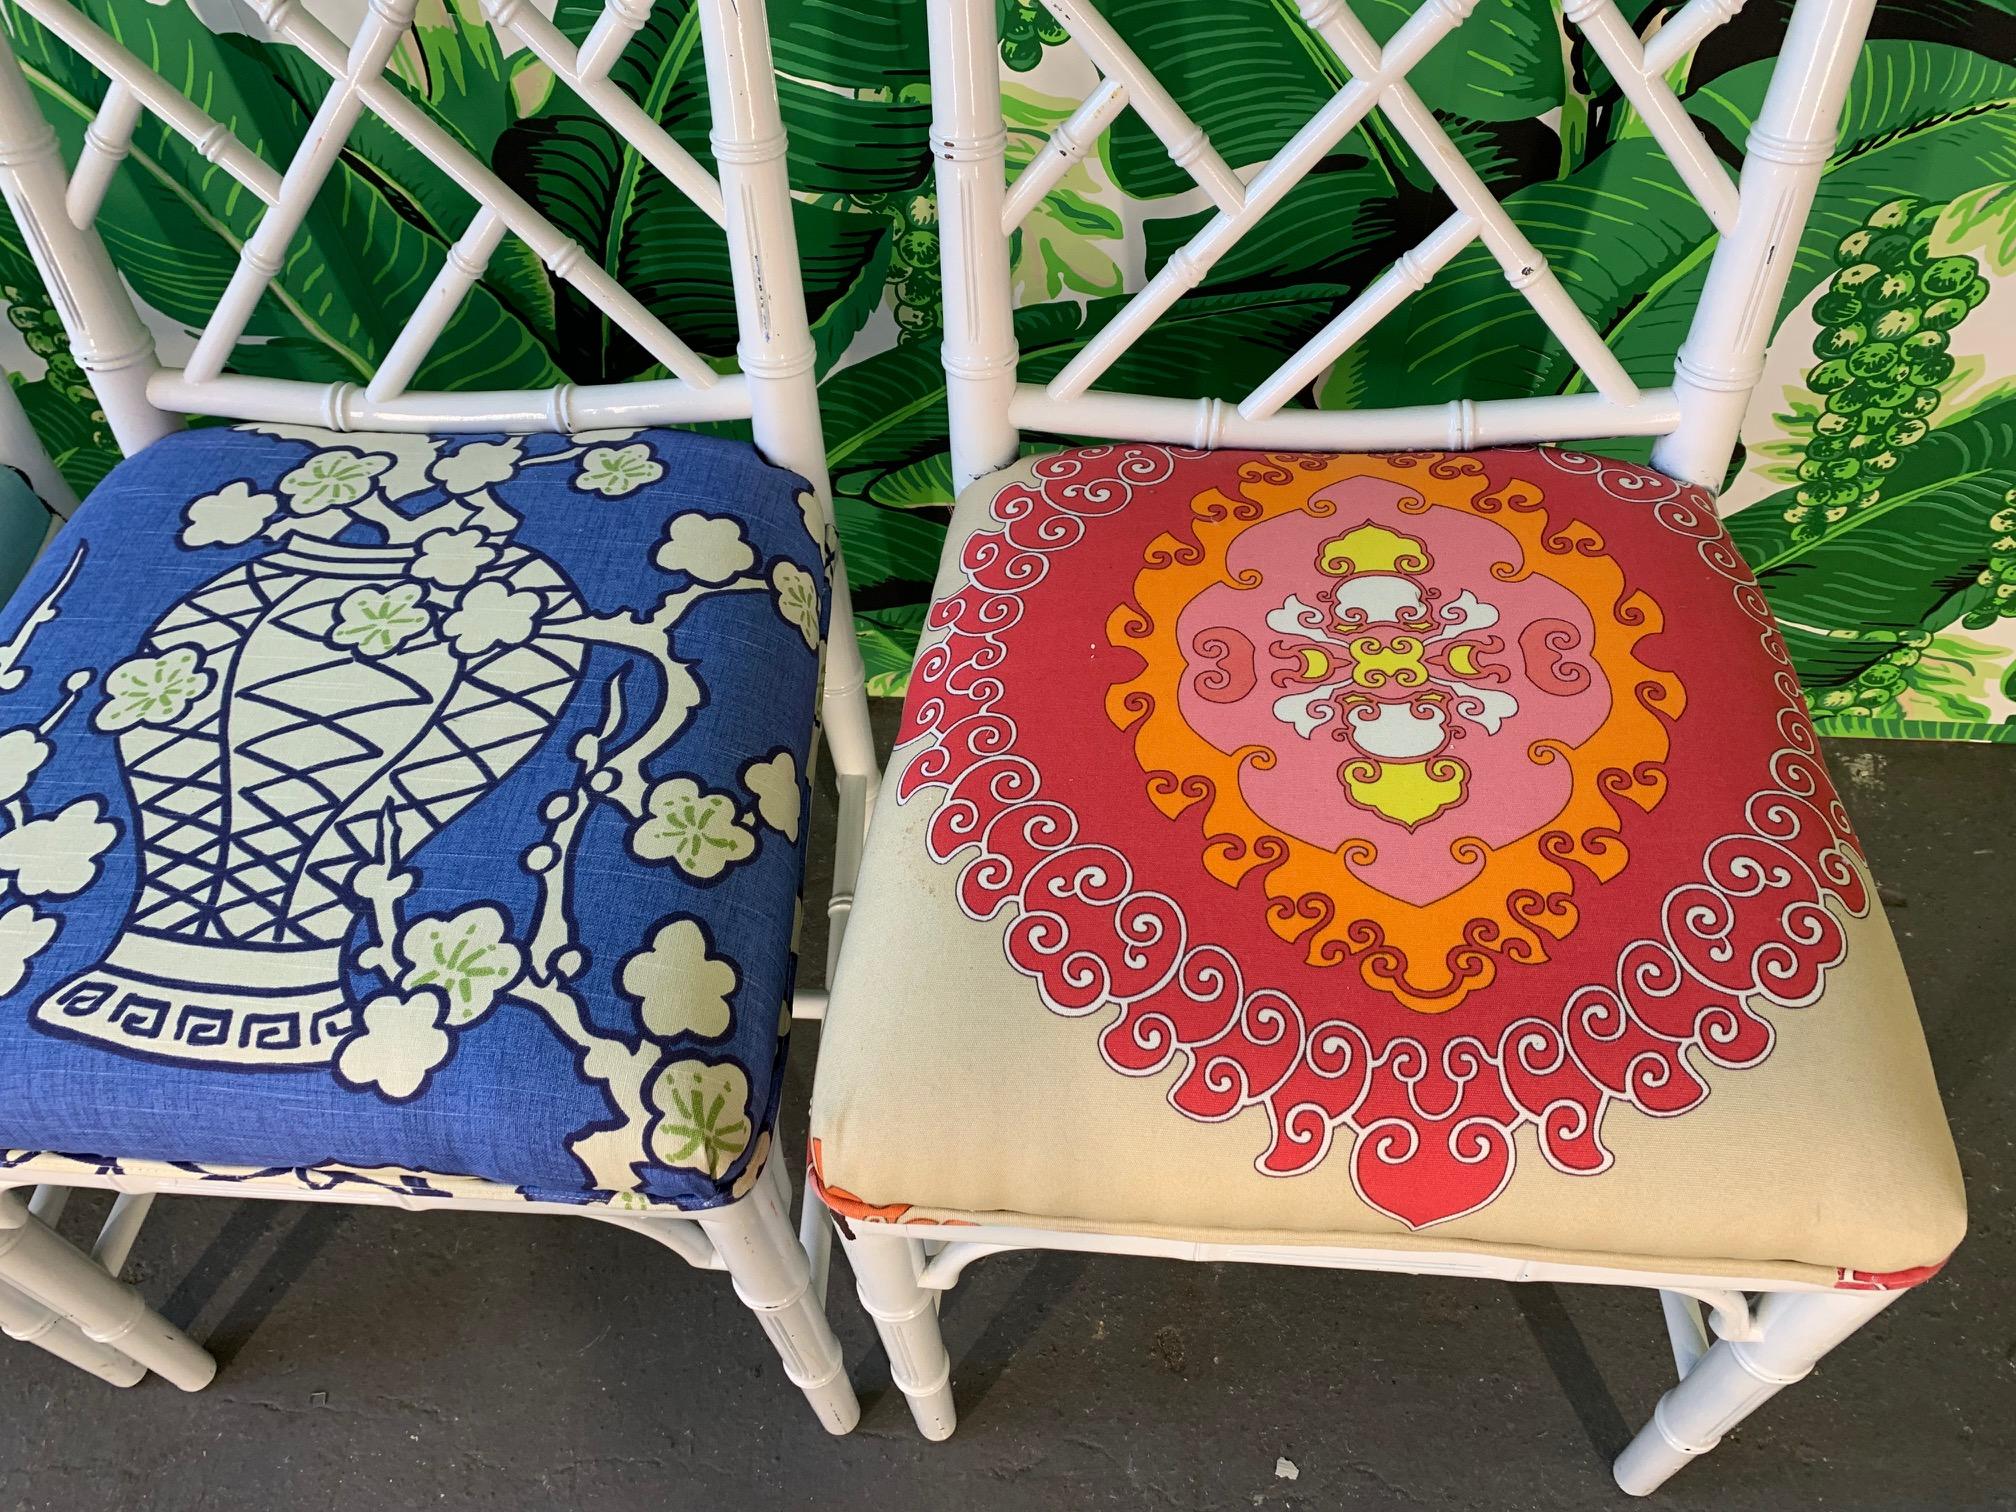 chinoiserie dining chairs